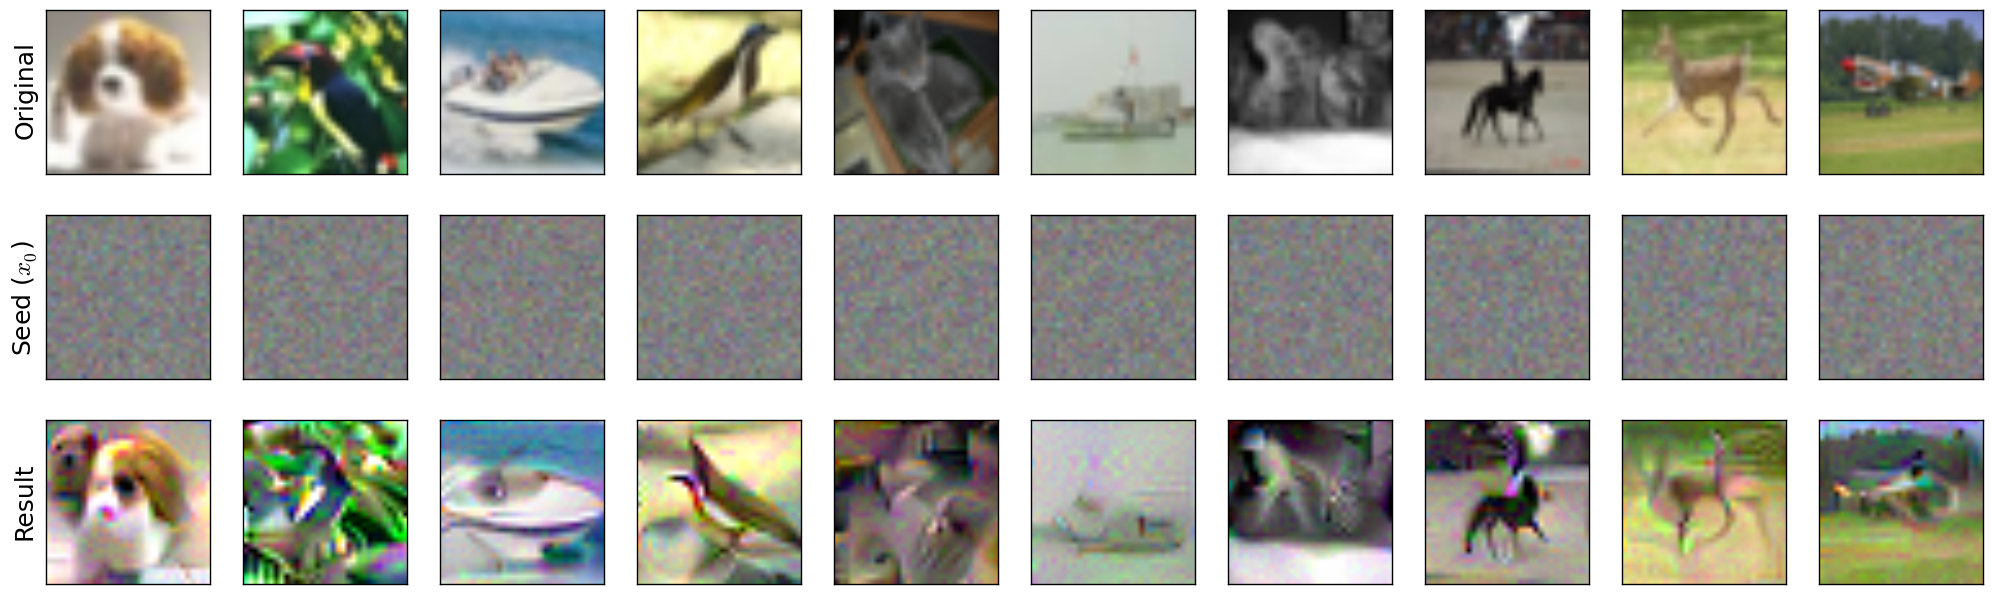 Sample visualization of inverting representations for a robust network.